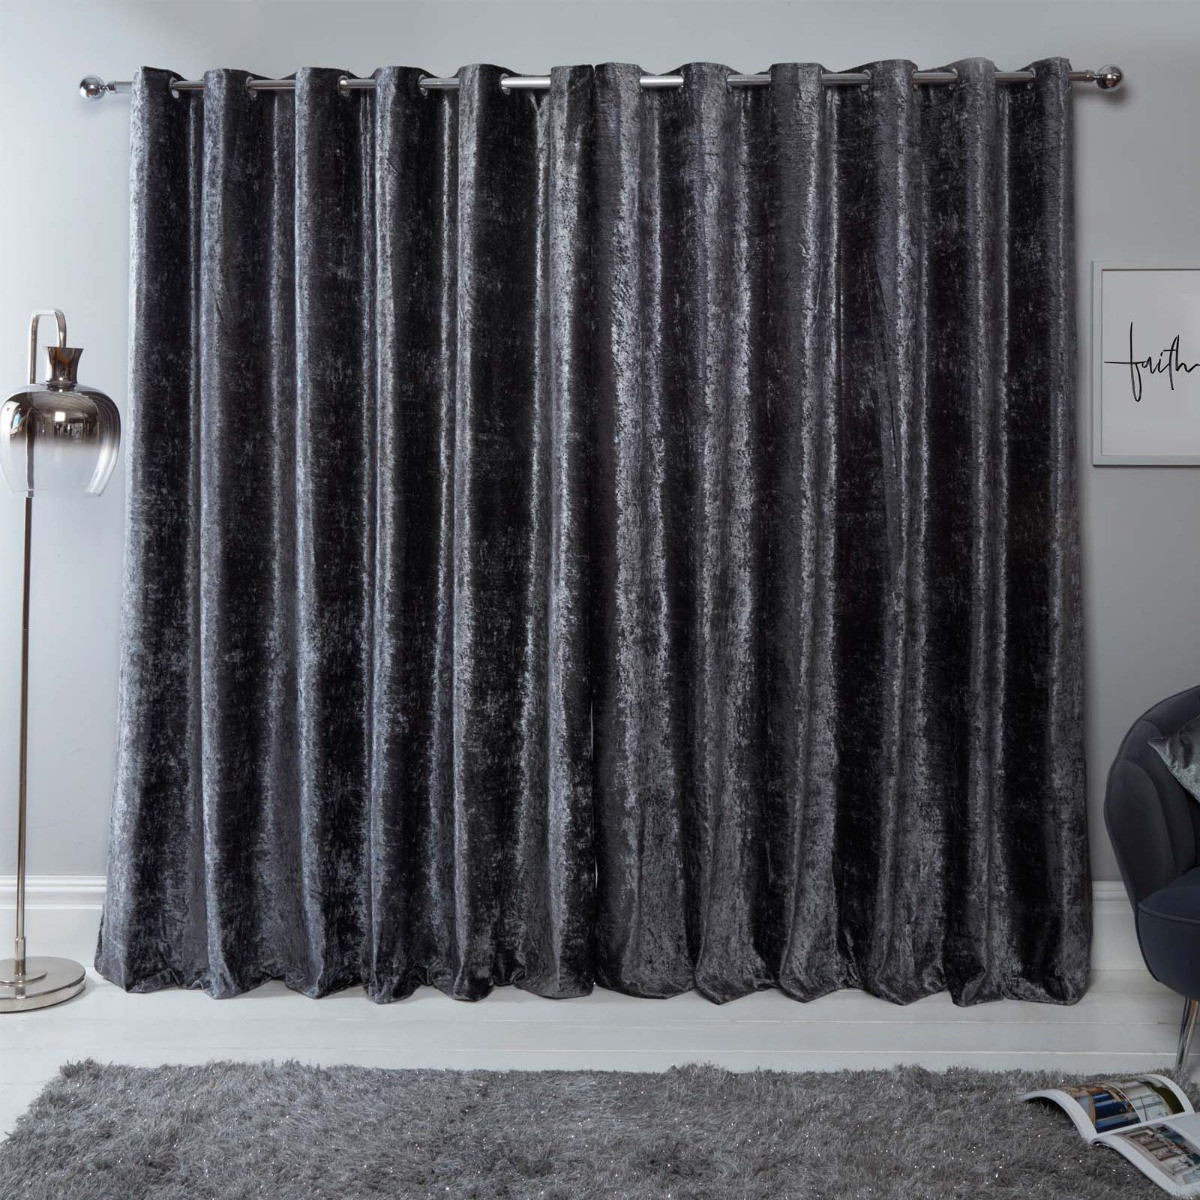 Sienna Home Crushed Velvet Eyelet Curtains - Charcoal Grey 66" x 54">